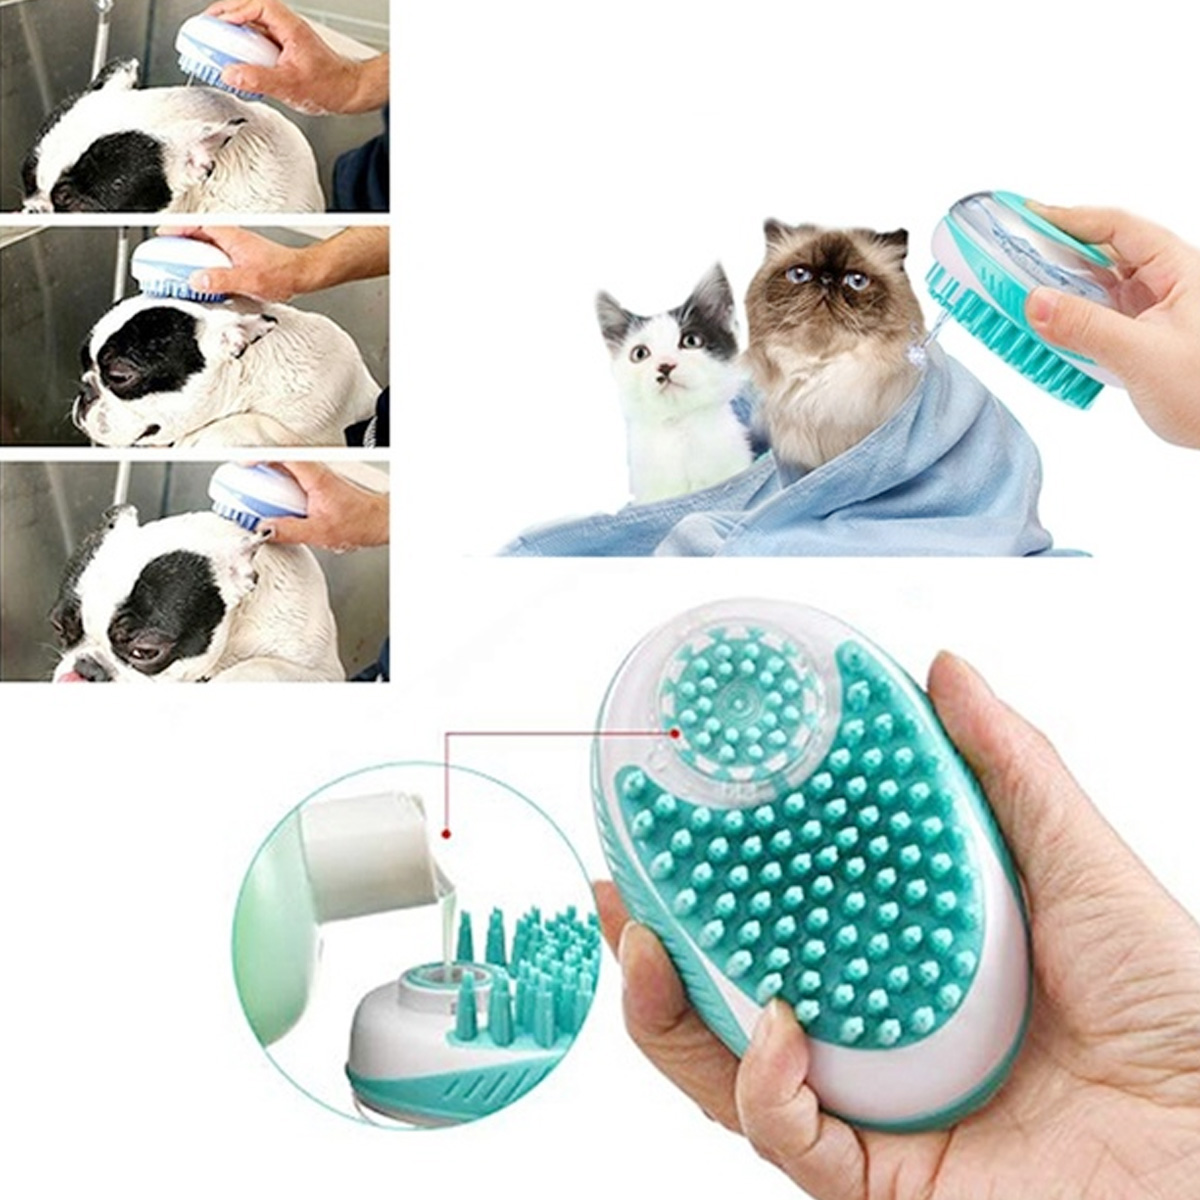 Pet Bath &Massage Brush Great Grooming Tool for Shampooing and Massaging cat&dog 